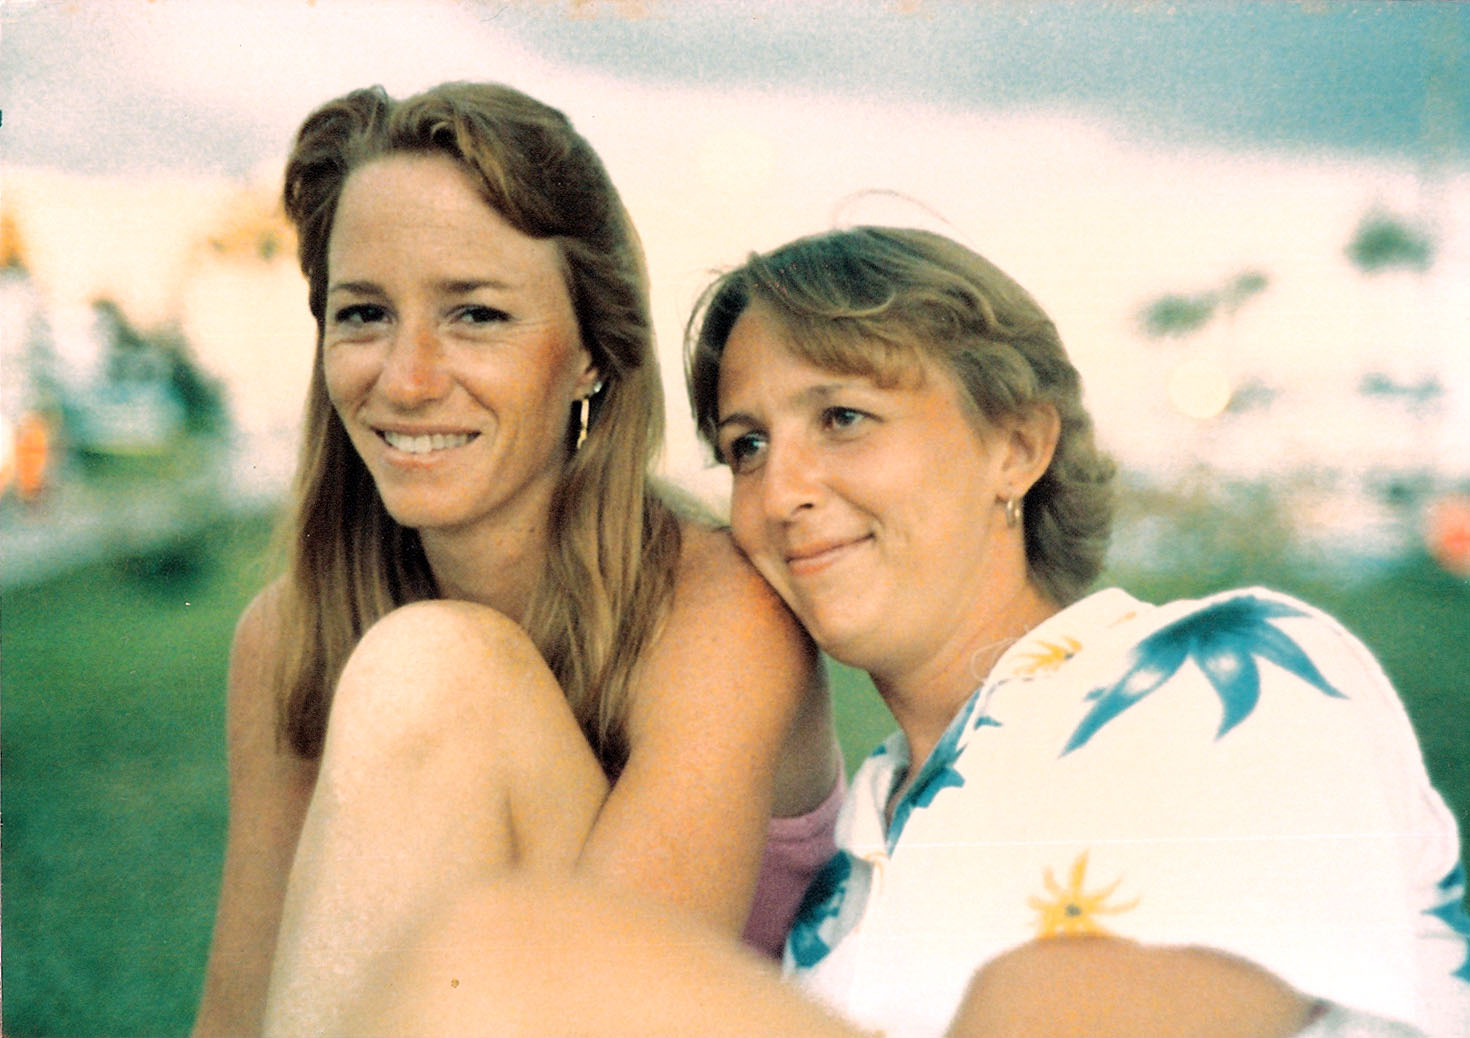 Mary and Susie a looooong time ago.